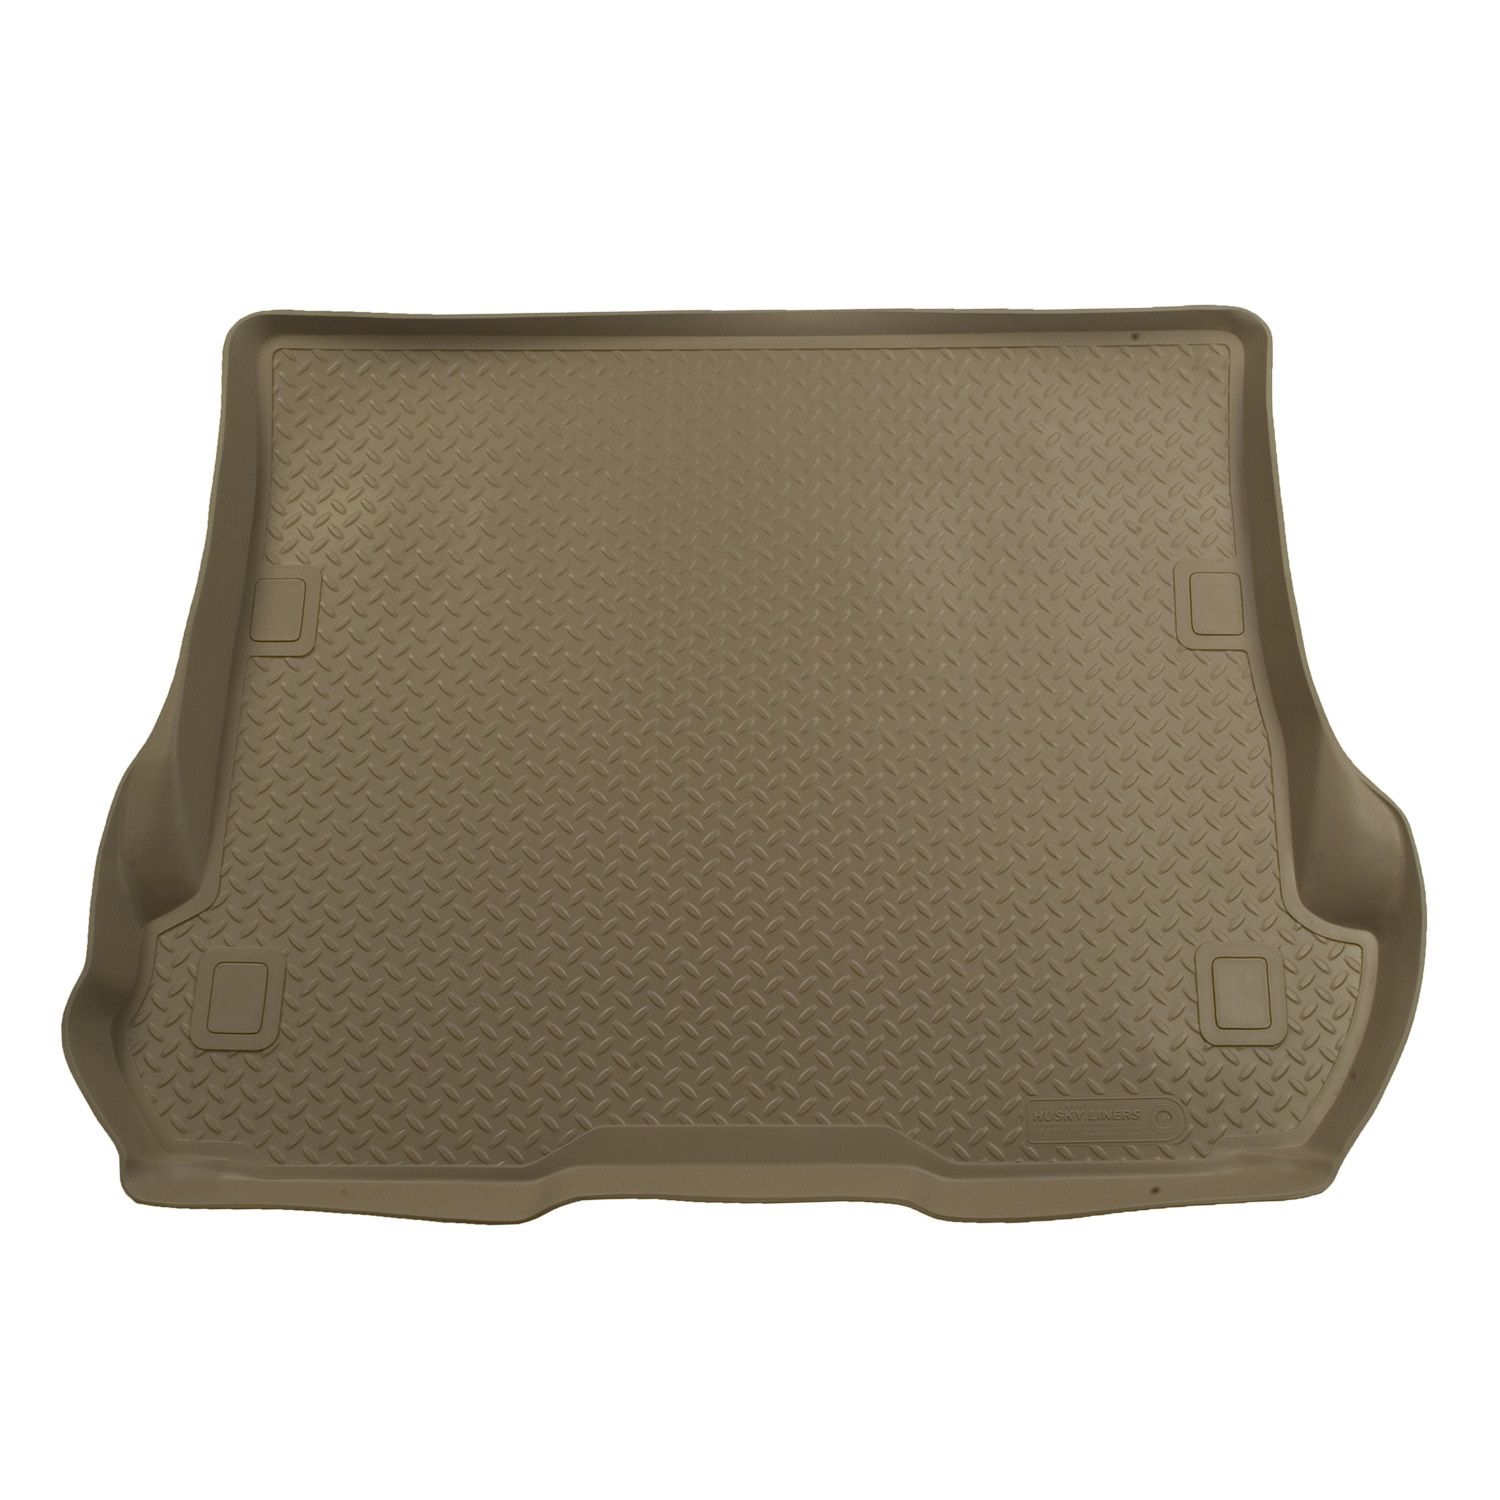 Husky Liners Husky Liners 26573 Classic Style; Cargo Liner Fits 09-14 Murano